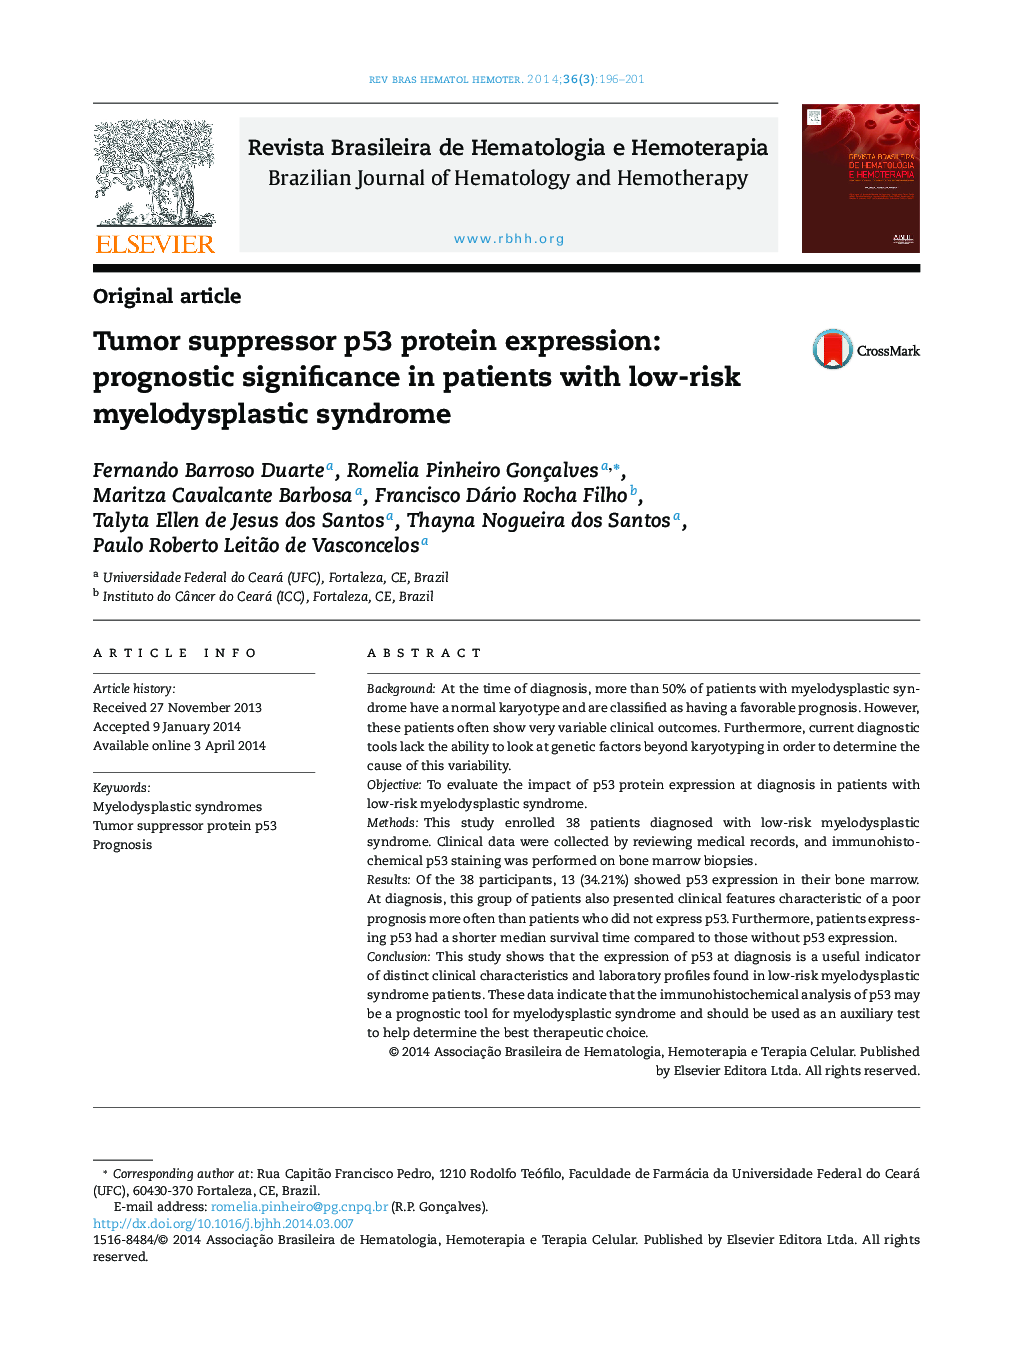 Tumor suppressor p53 protein expression: prognostic significance in patients with low-risk myelodysplastic syndrome